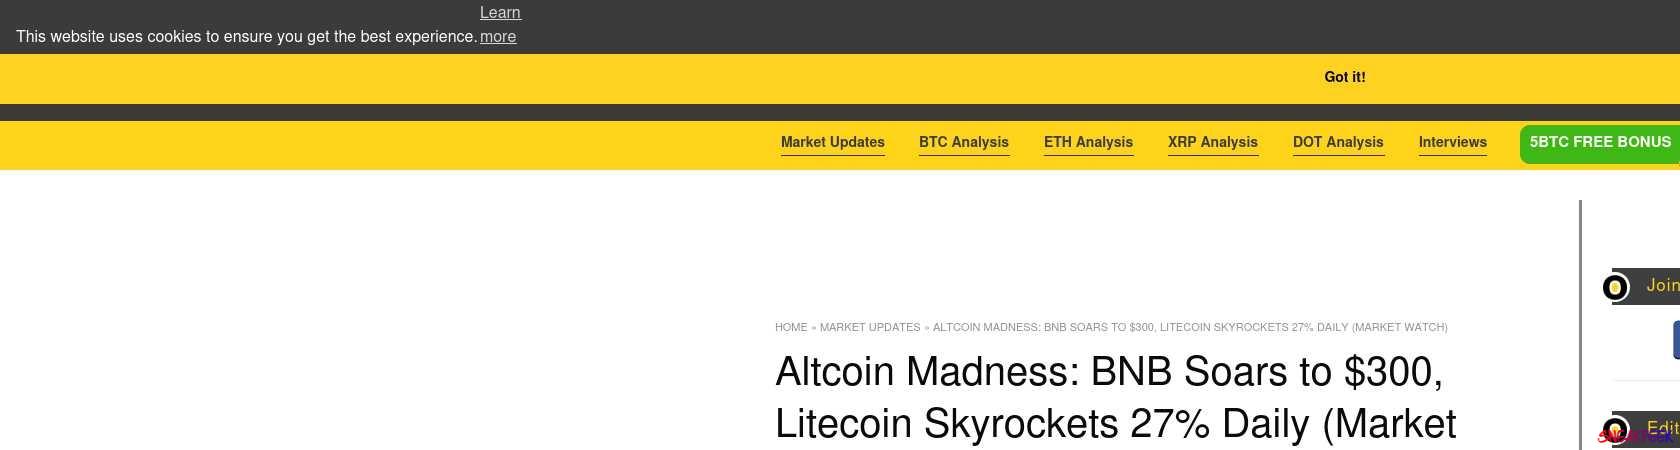 Read the full Article:  ⭲ Altcoin Madness: BNB Soars to $300, Litecoin Skyrockets 27% Daily (Market Watch)